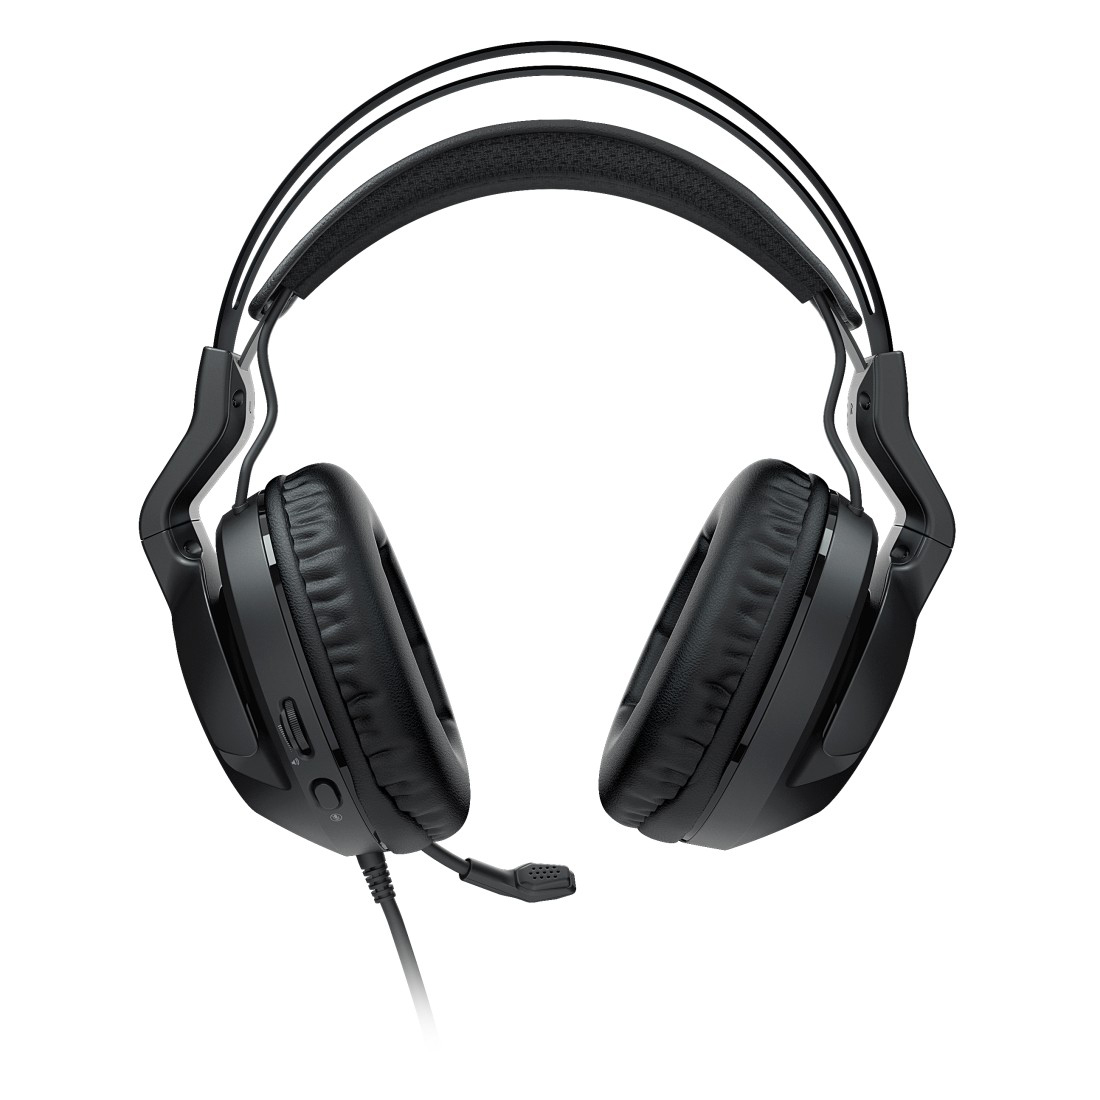 ROCCAT Elo X Stereo, Schwarz Over-ear Gaming Headset